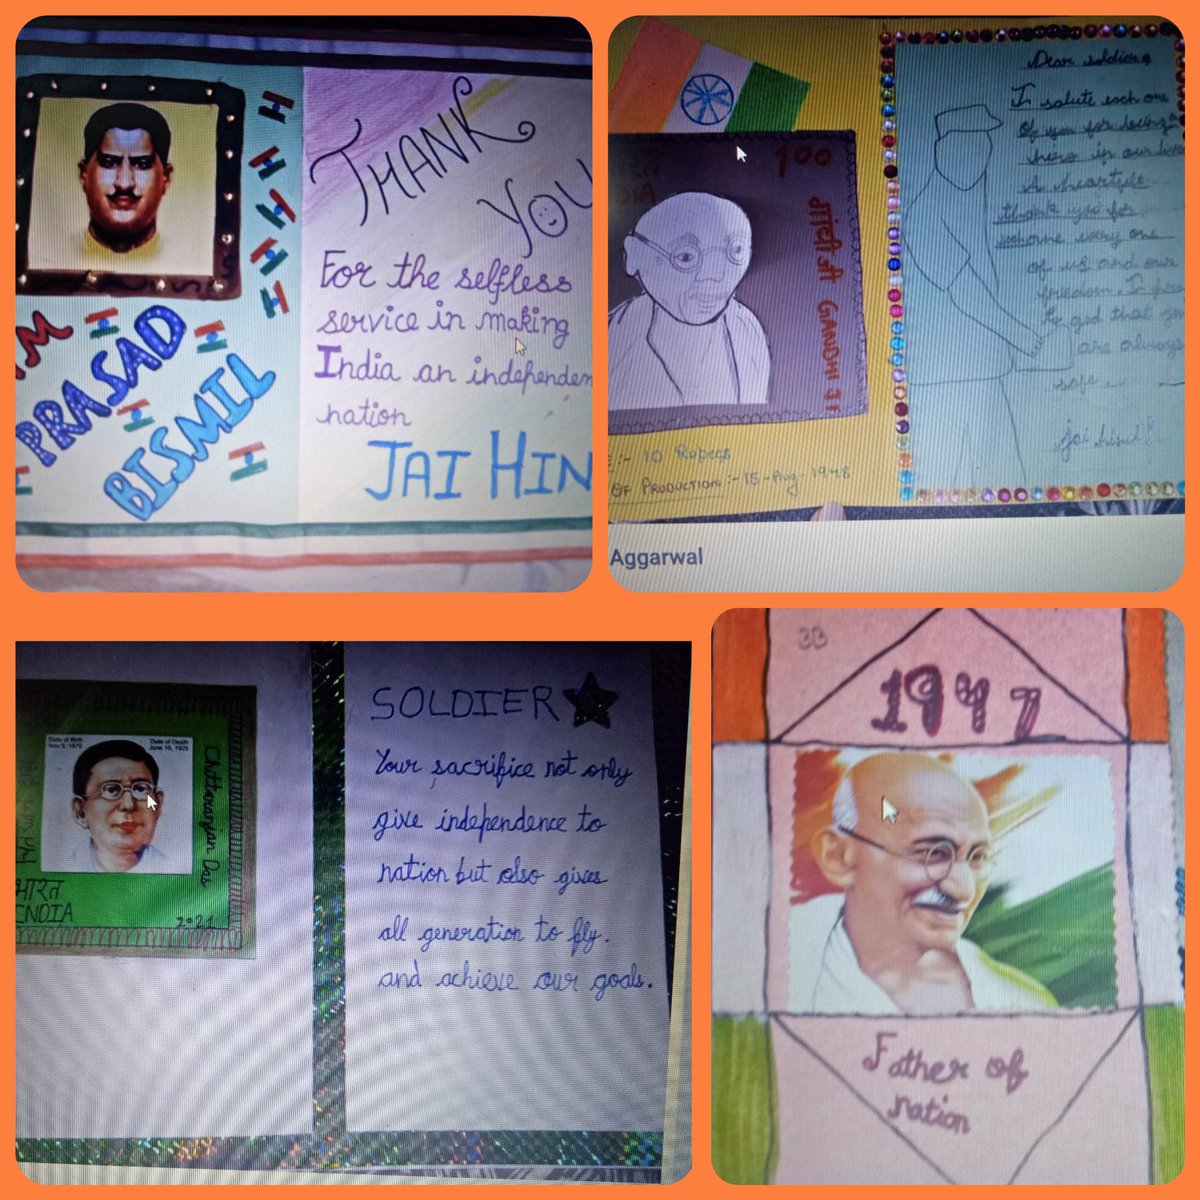 On Gratitude Day Ss of cl 3 paid their tribute to Freedom fighters who fought for us& gave us the privilege to call ourselves the citizens of free country #Ahlconintl @ashokkp @y_sanjay @KavitaS2003 @Shipra_Srivastv @sdg4all @cbseindia29 @sdgforindia